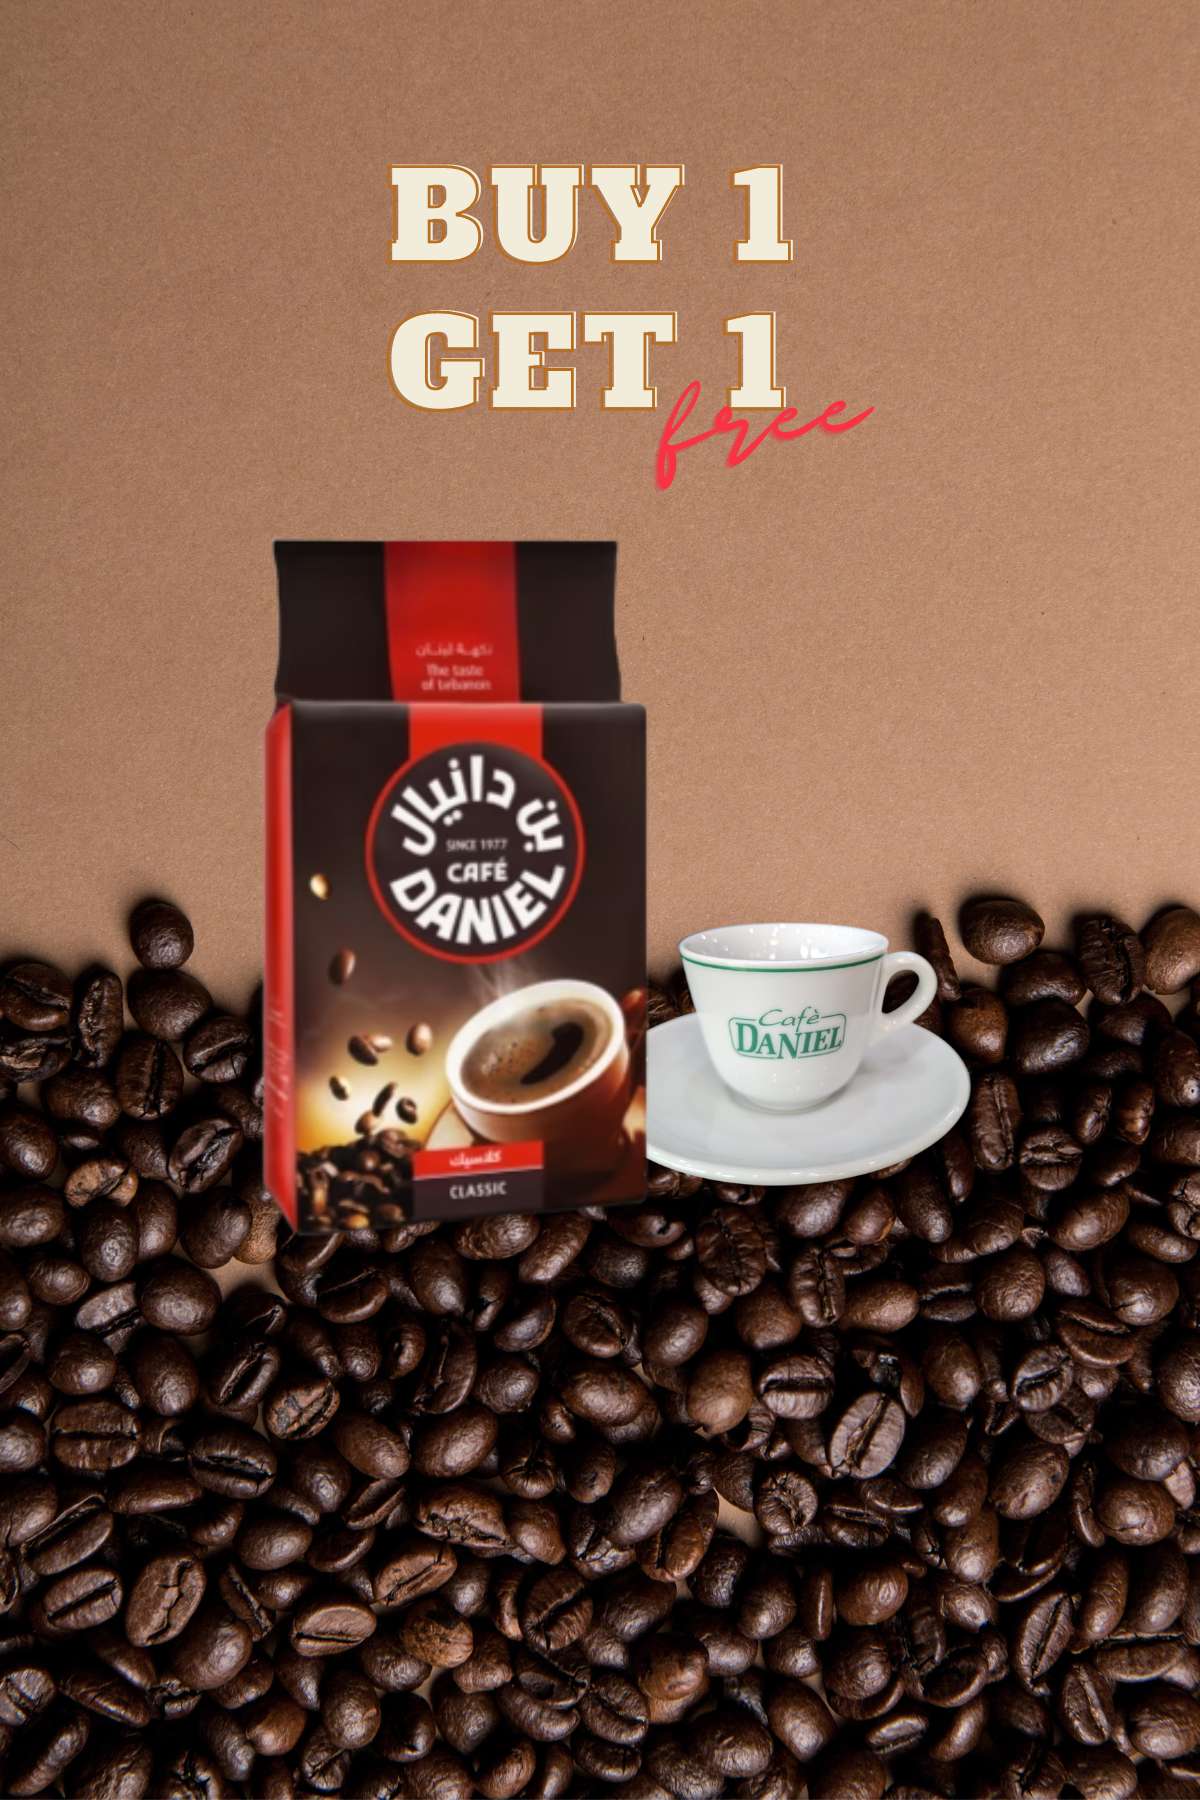 Cafe Daniel Classic 180g + Coffee Cup Free